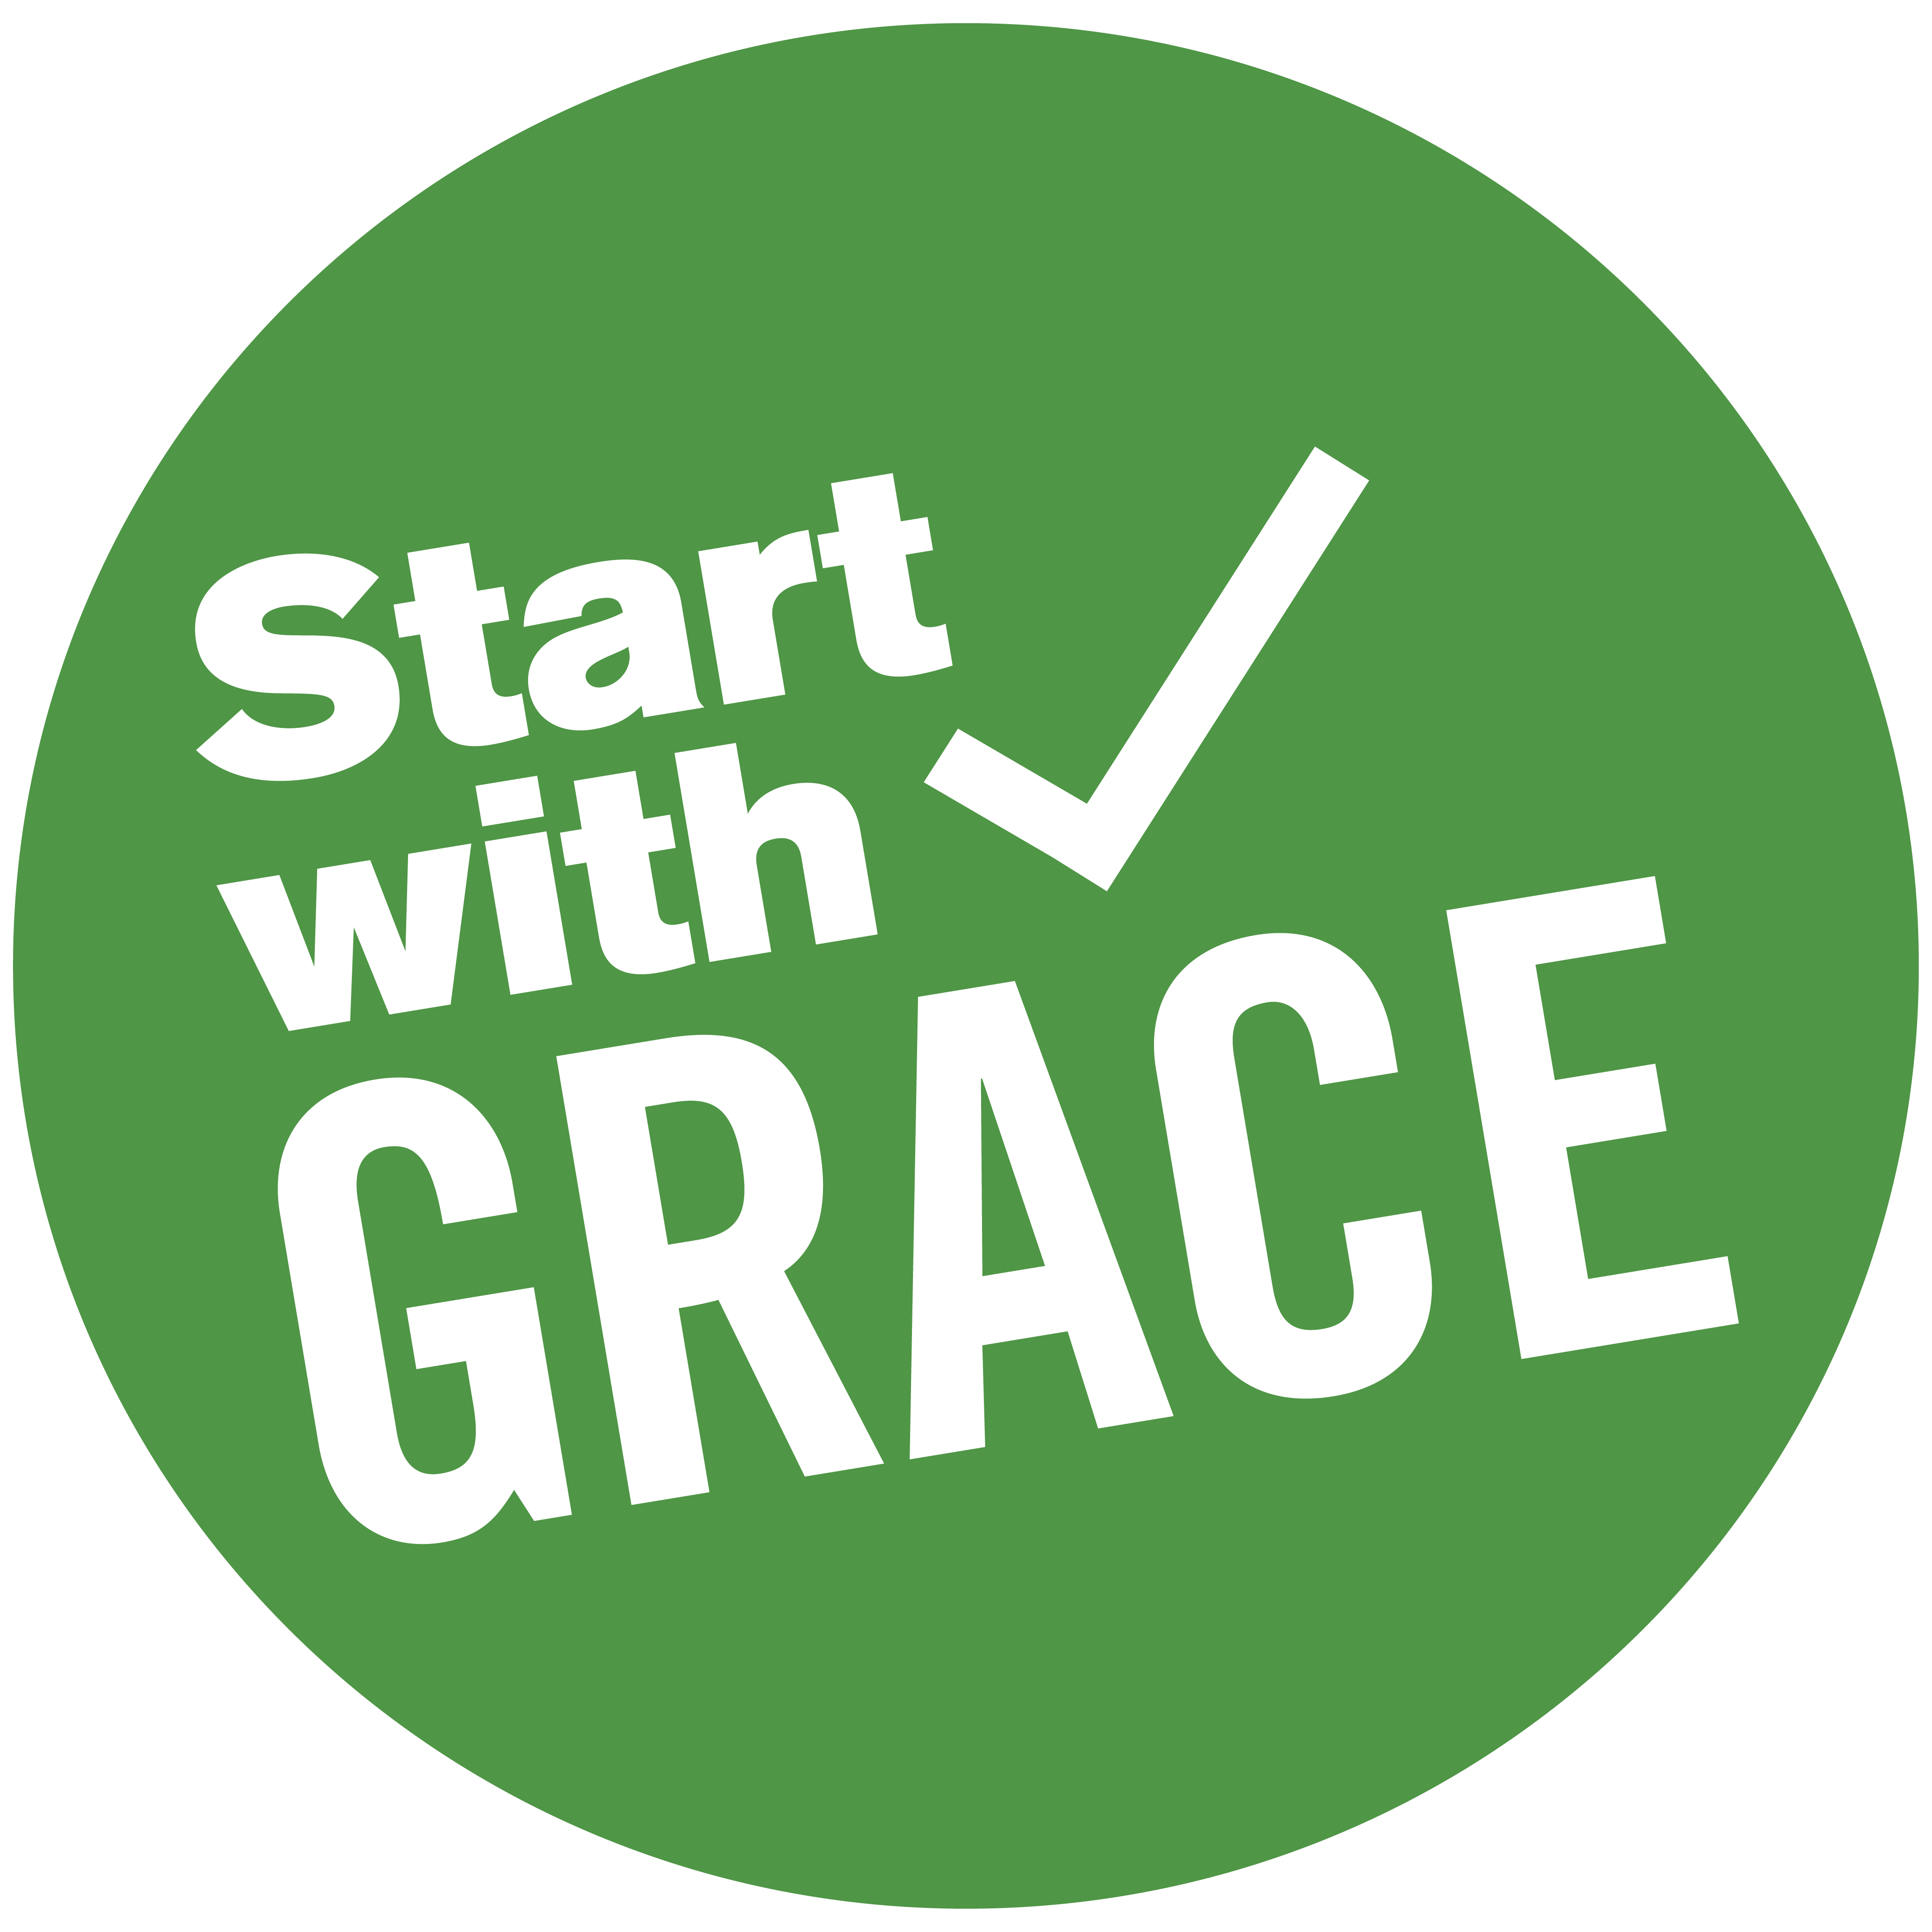 Start with Grace